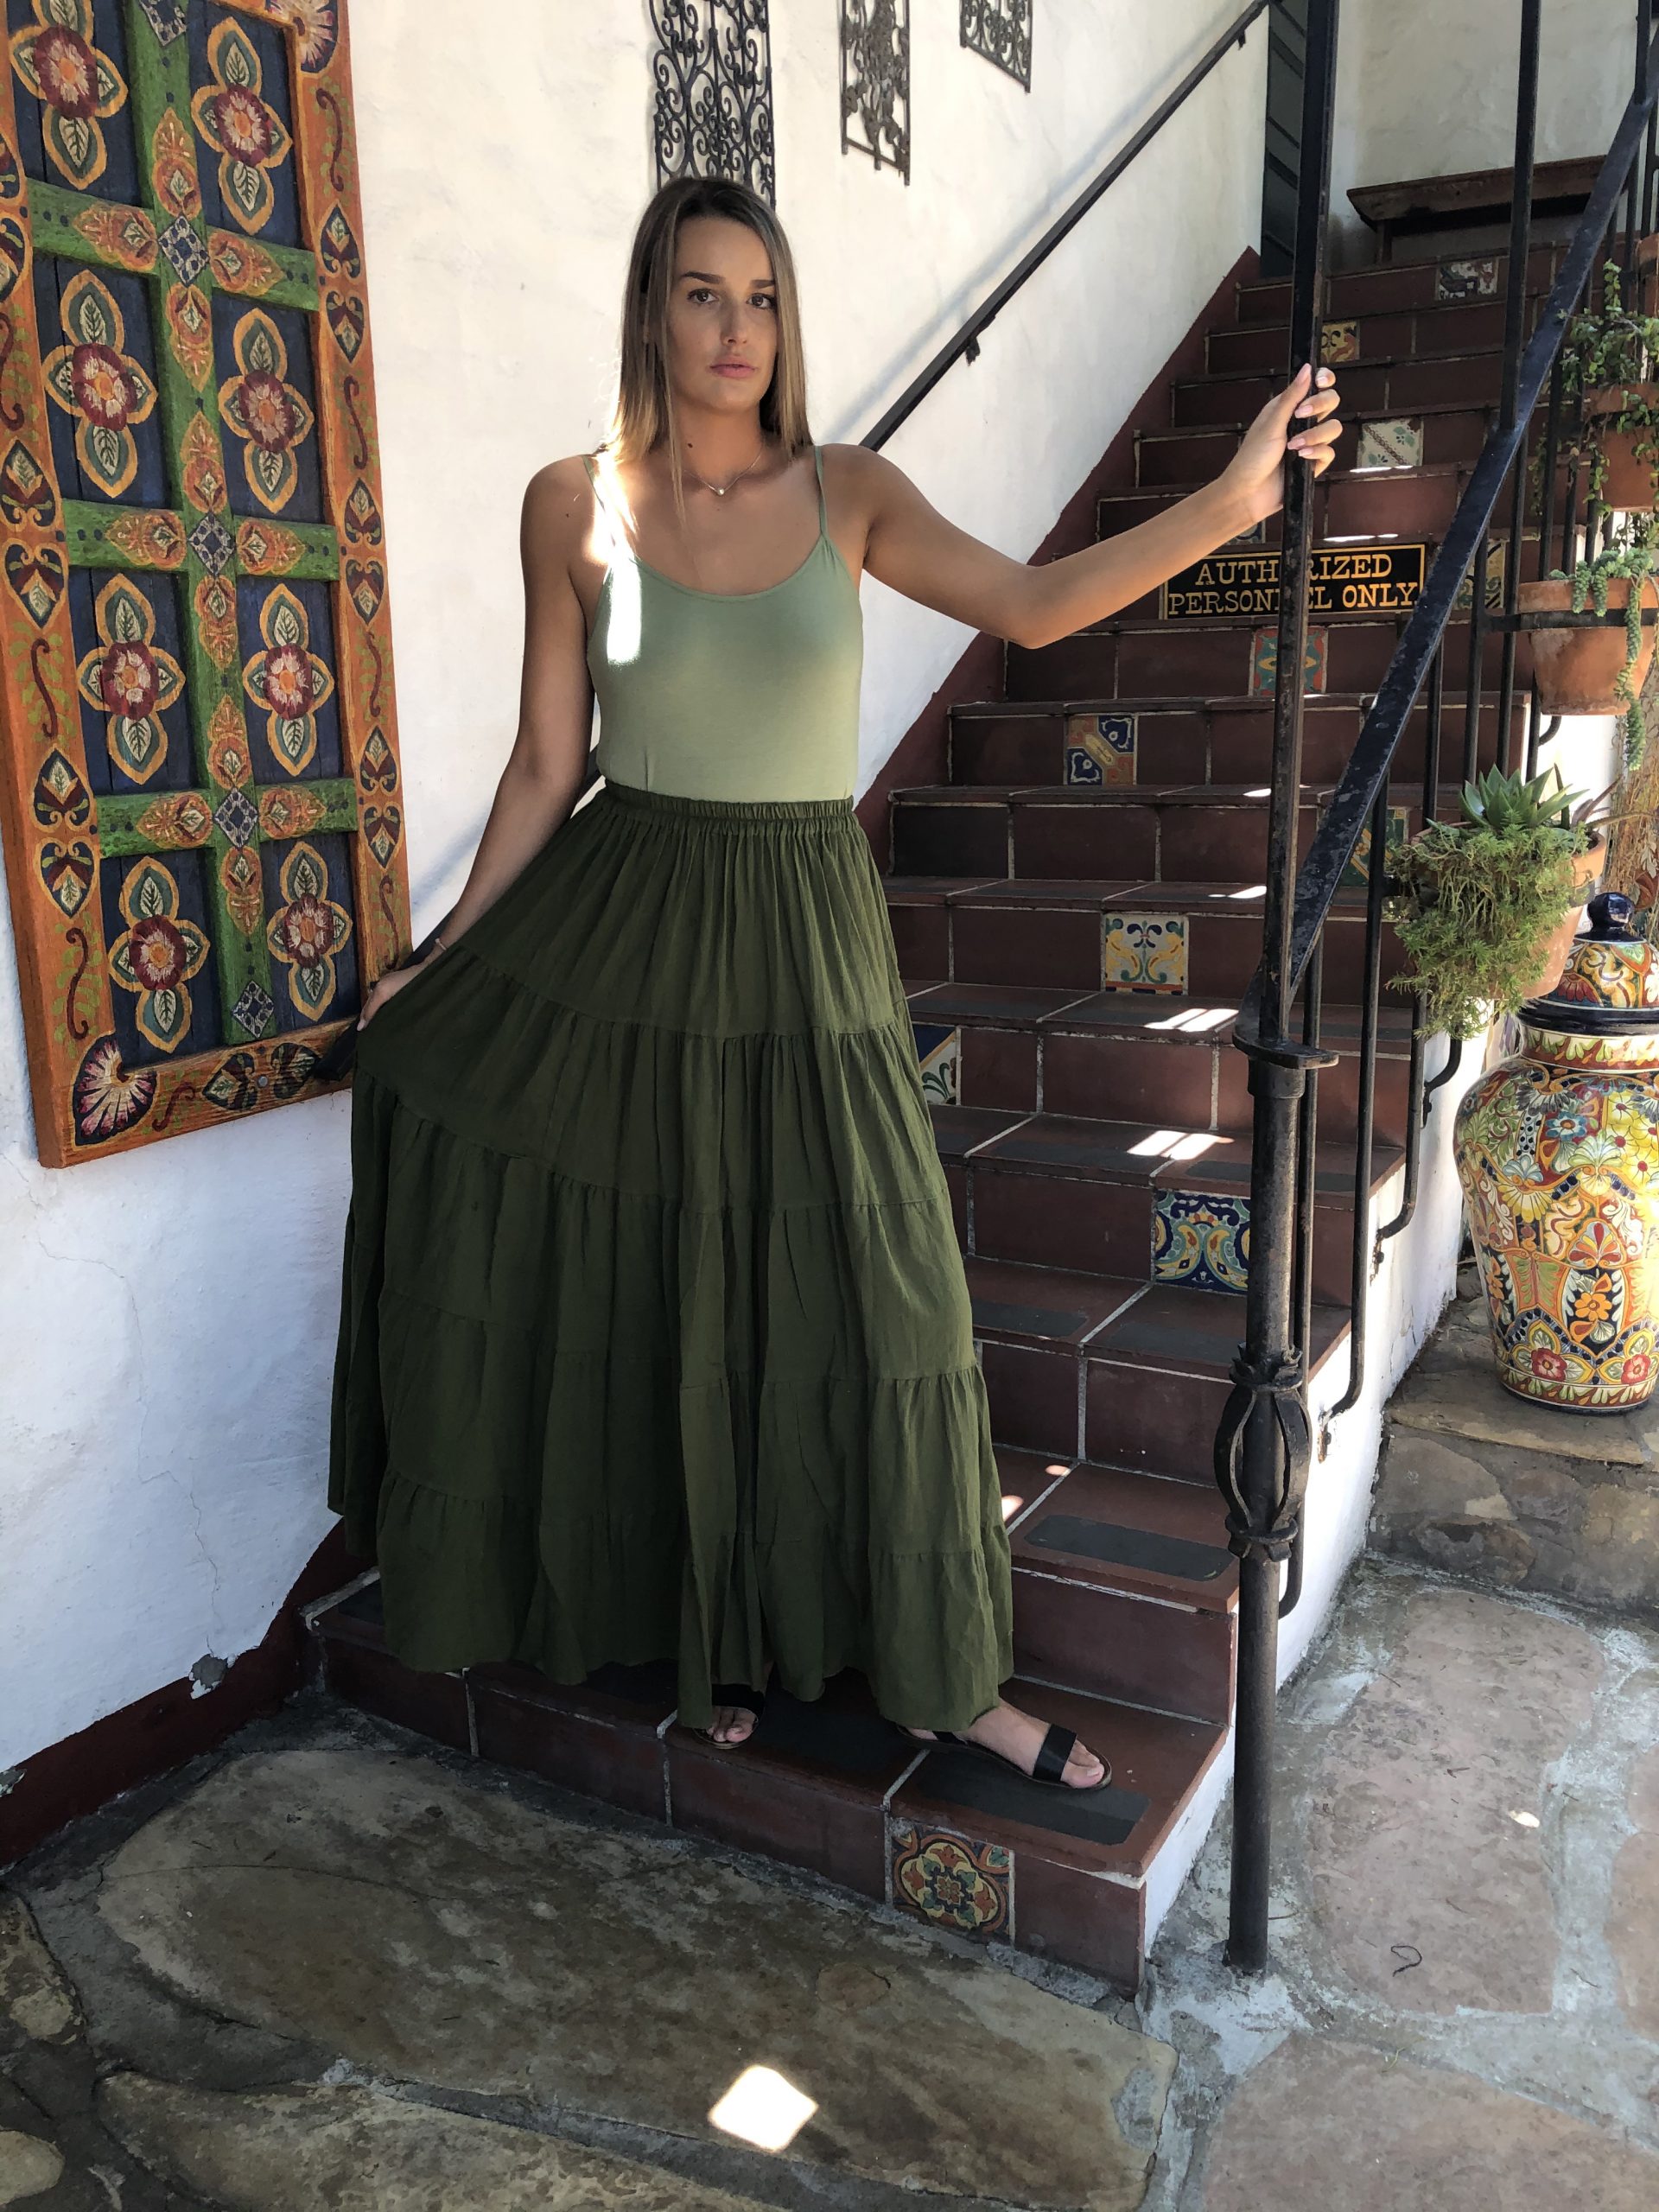 Buy Baja Stretch Gypsy Maxi Skirt Available in Several Colors!